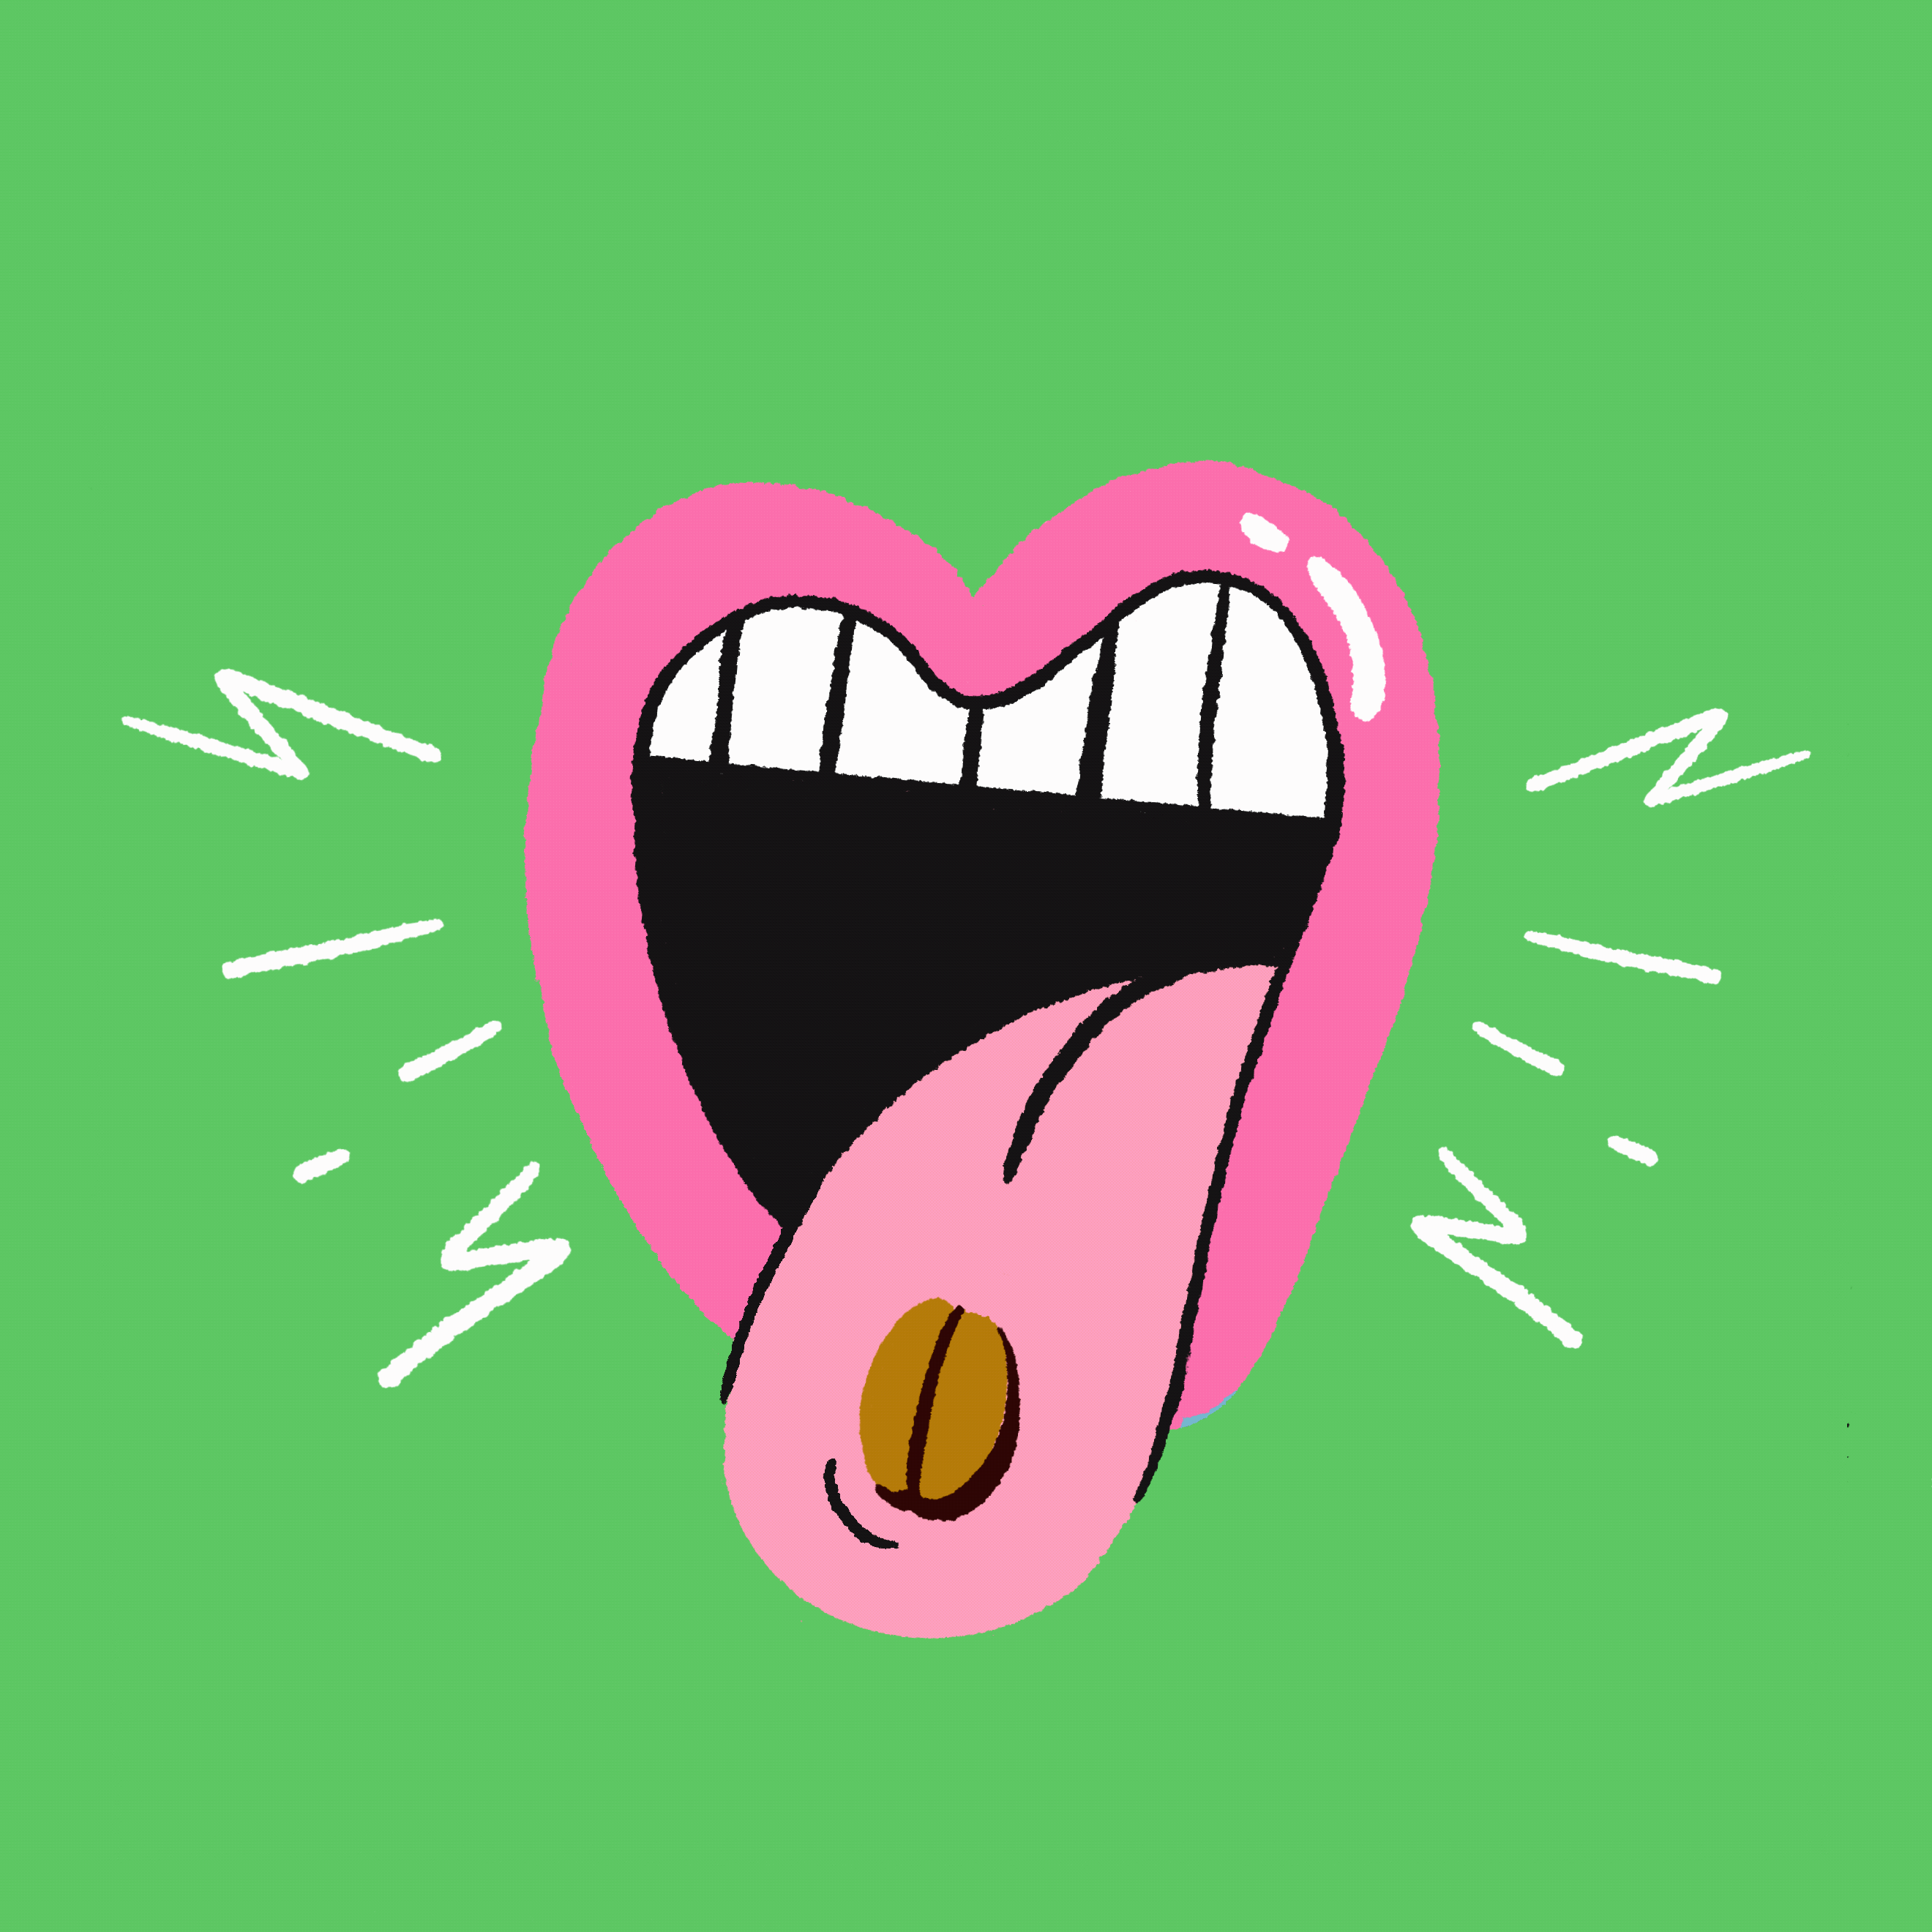 Tab acid animation bean buzzed caffine coffee dose face gif illustration lips micro mouth open smile tab teeth tongue trip trippy